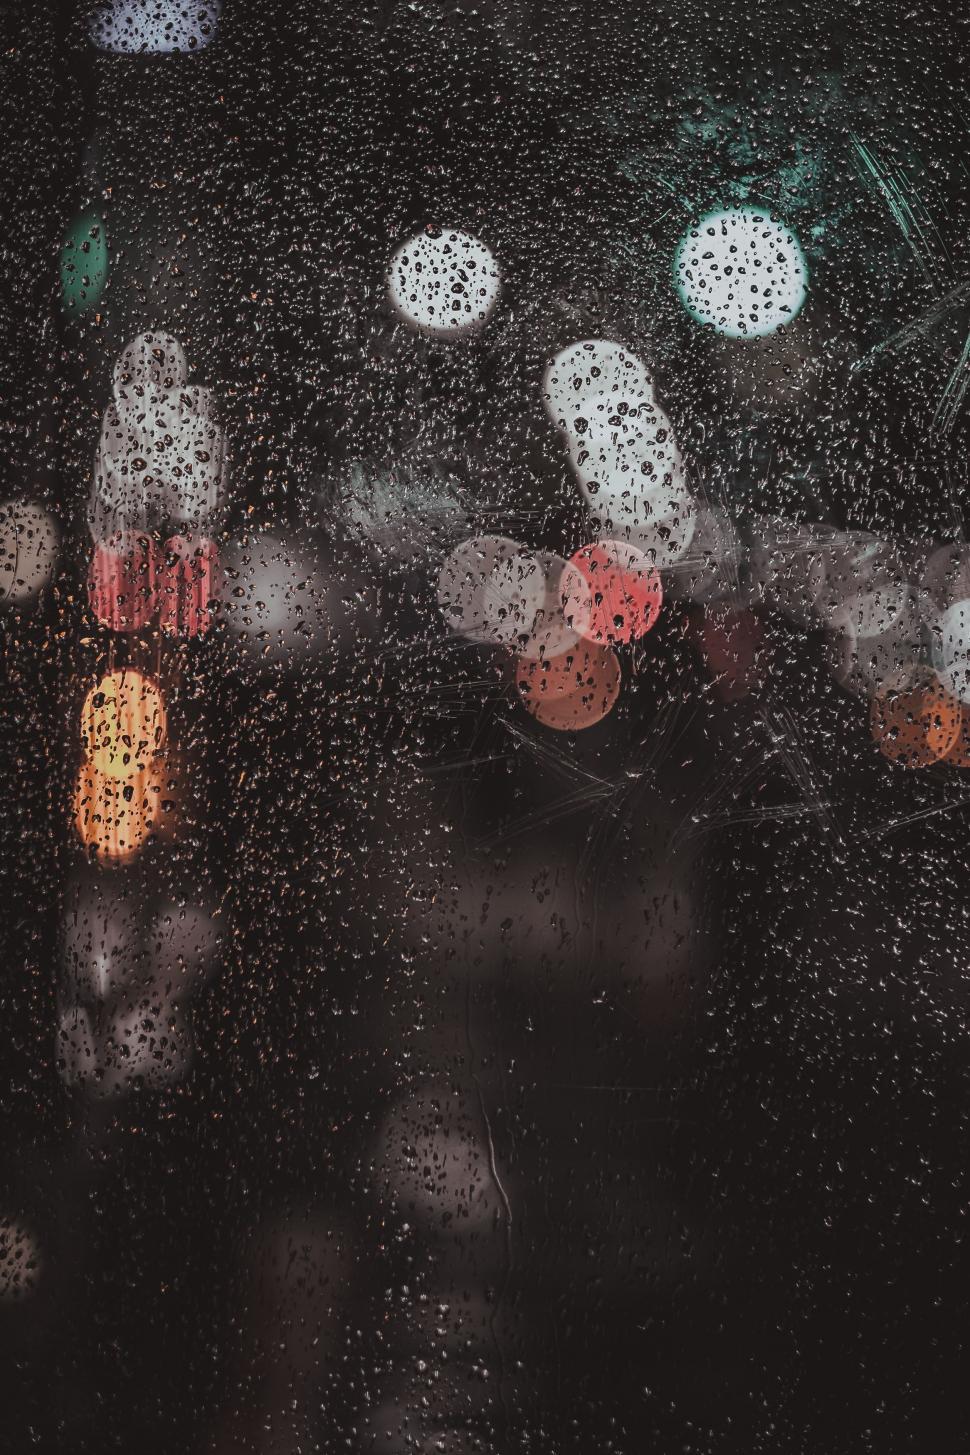 Free Image of Rain Drops on a Window With Traffic Lights 